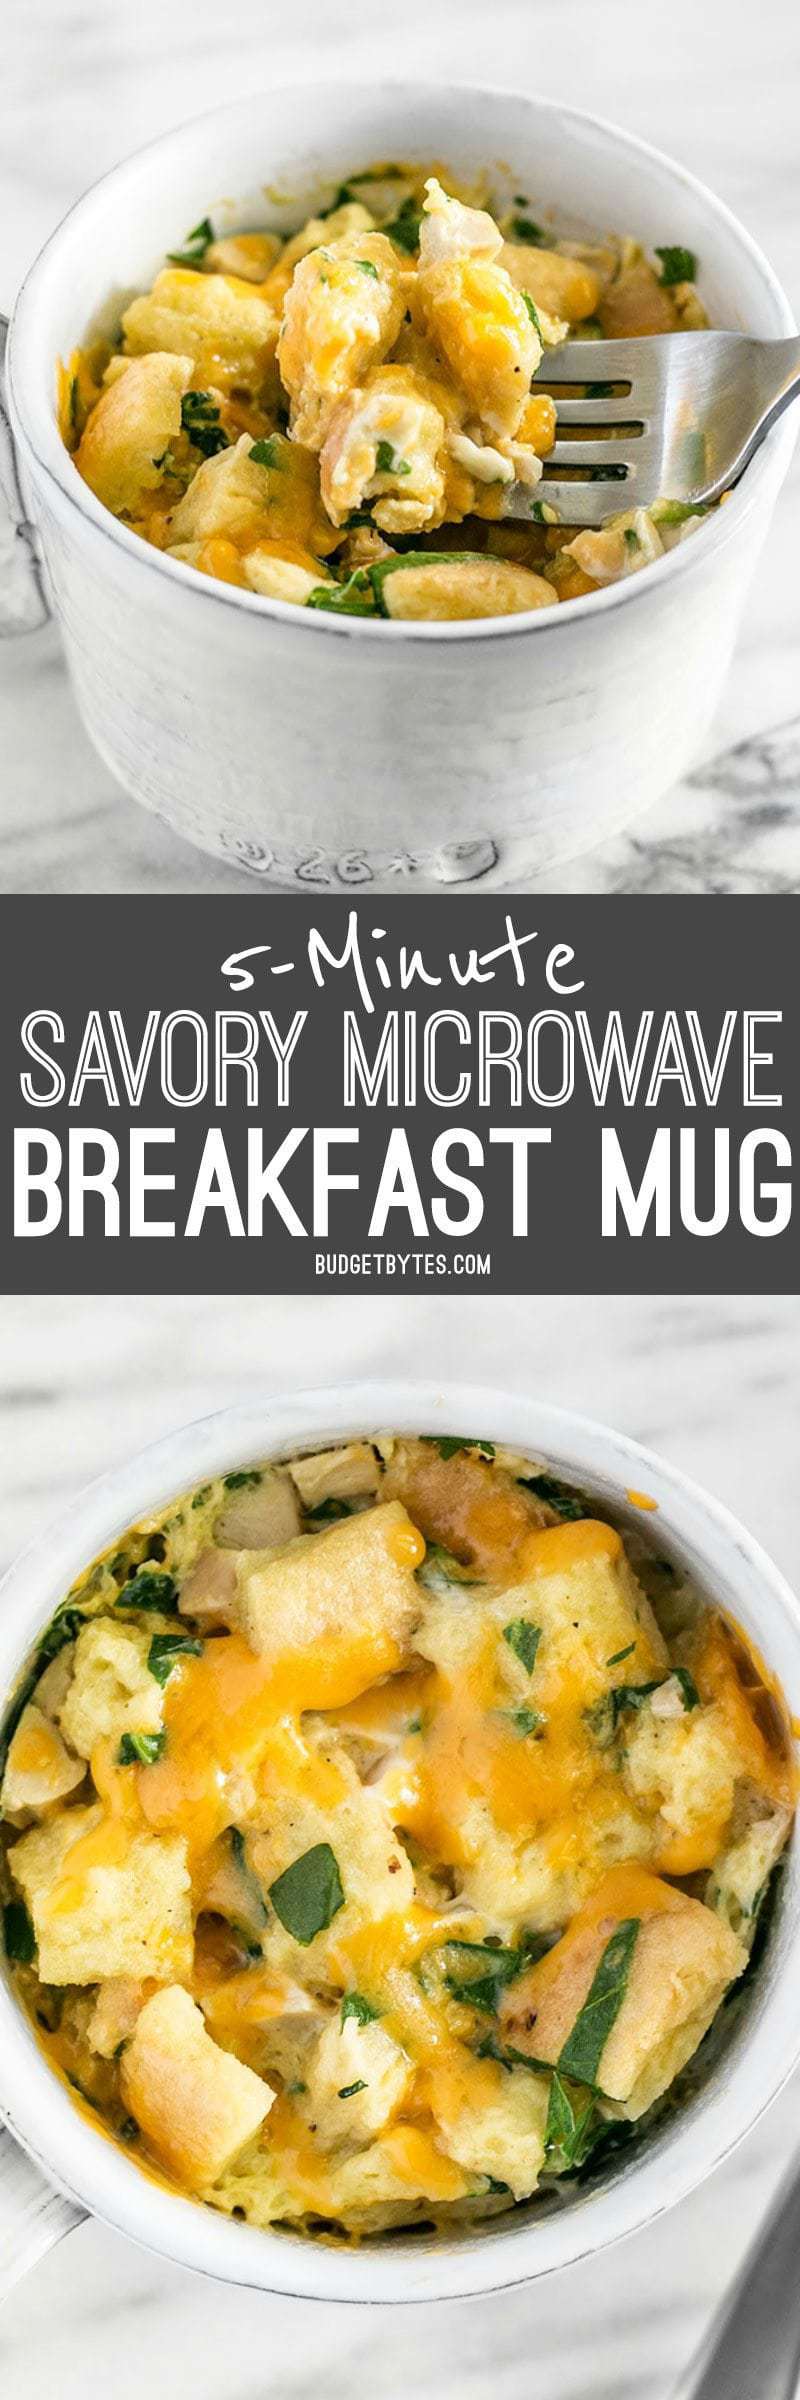 Use the leftovers in your fridge to make this delicious and filling 5 Minute Savory Microwave Breakfast Mug. Fast and easy! BudgetBytes.com